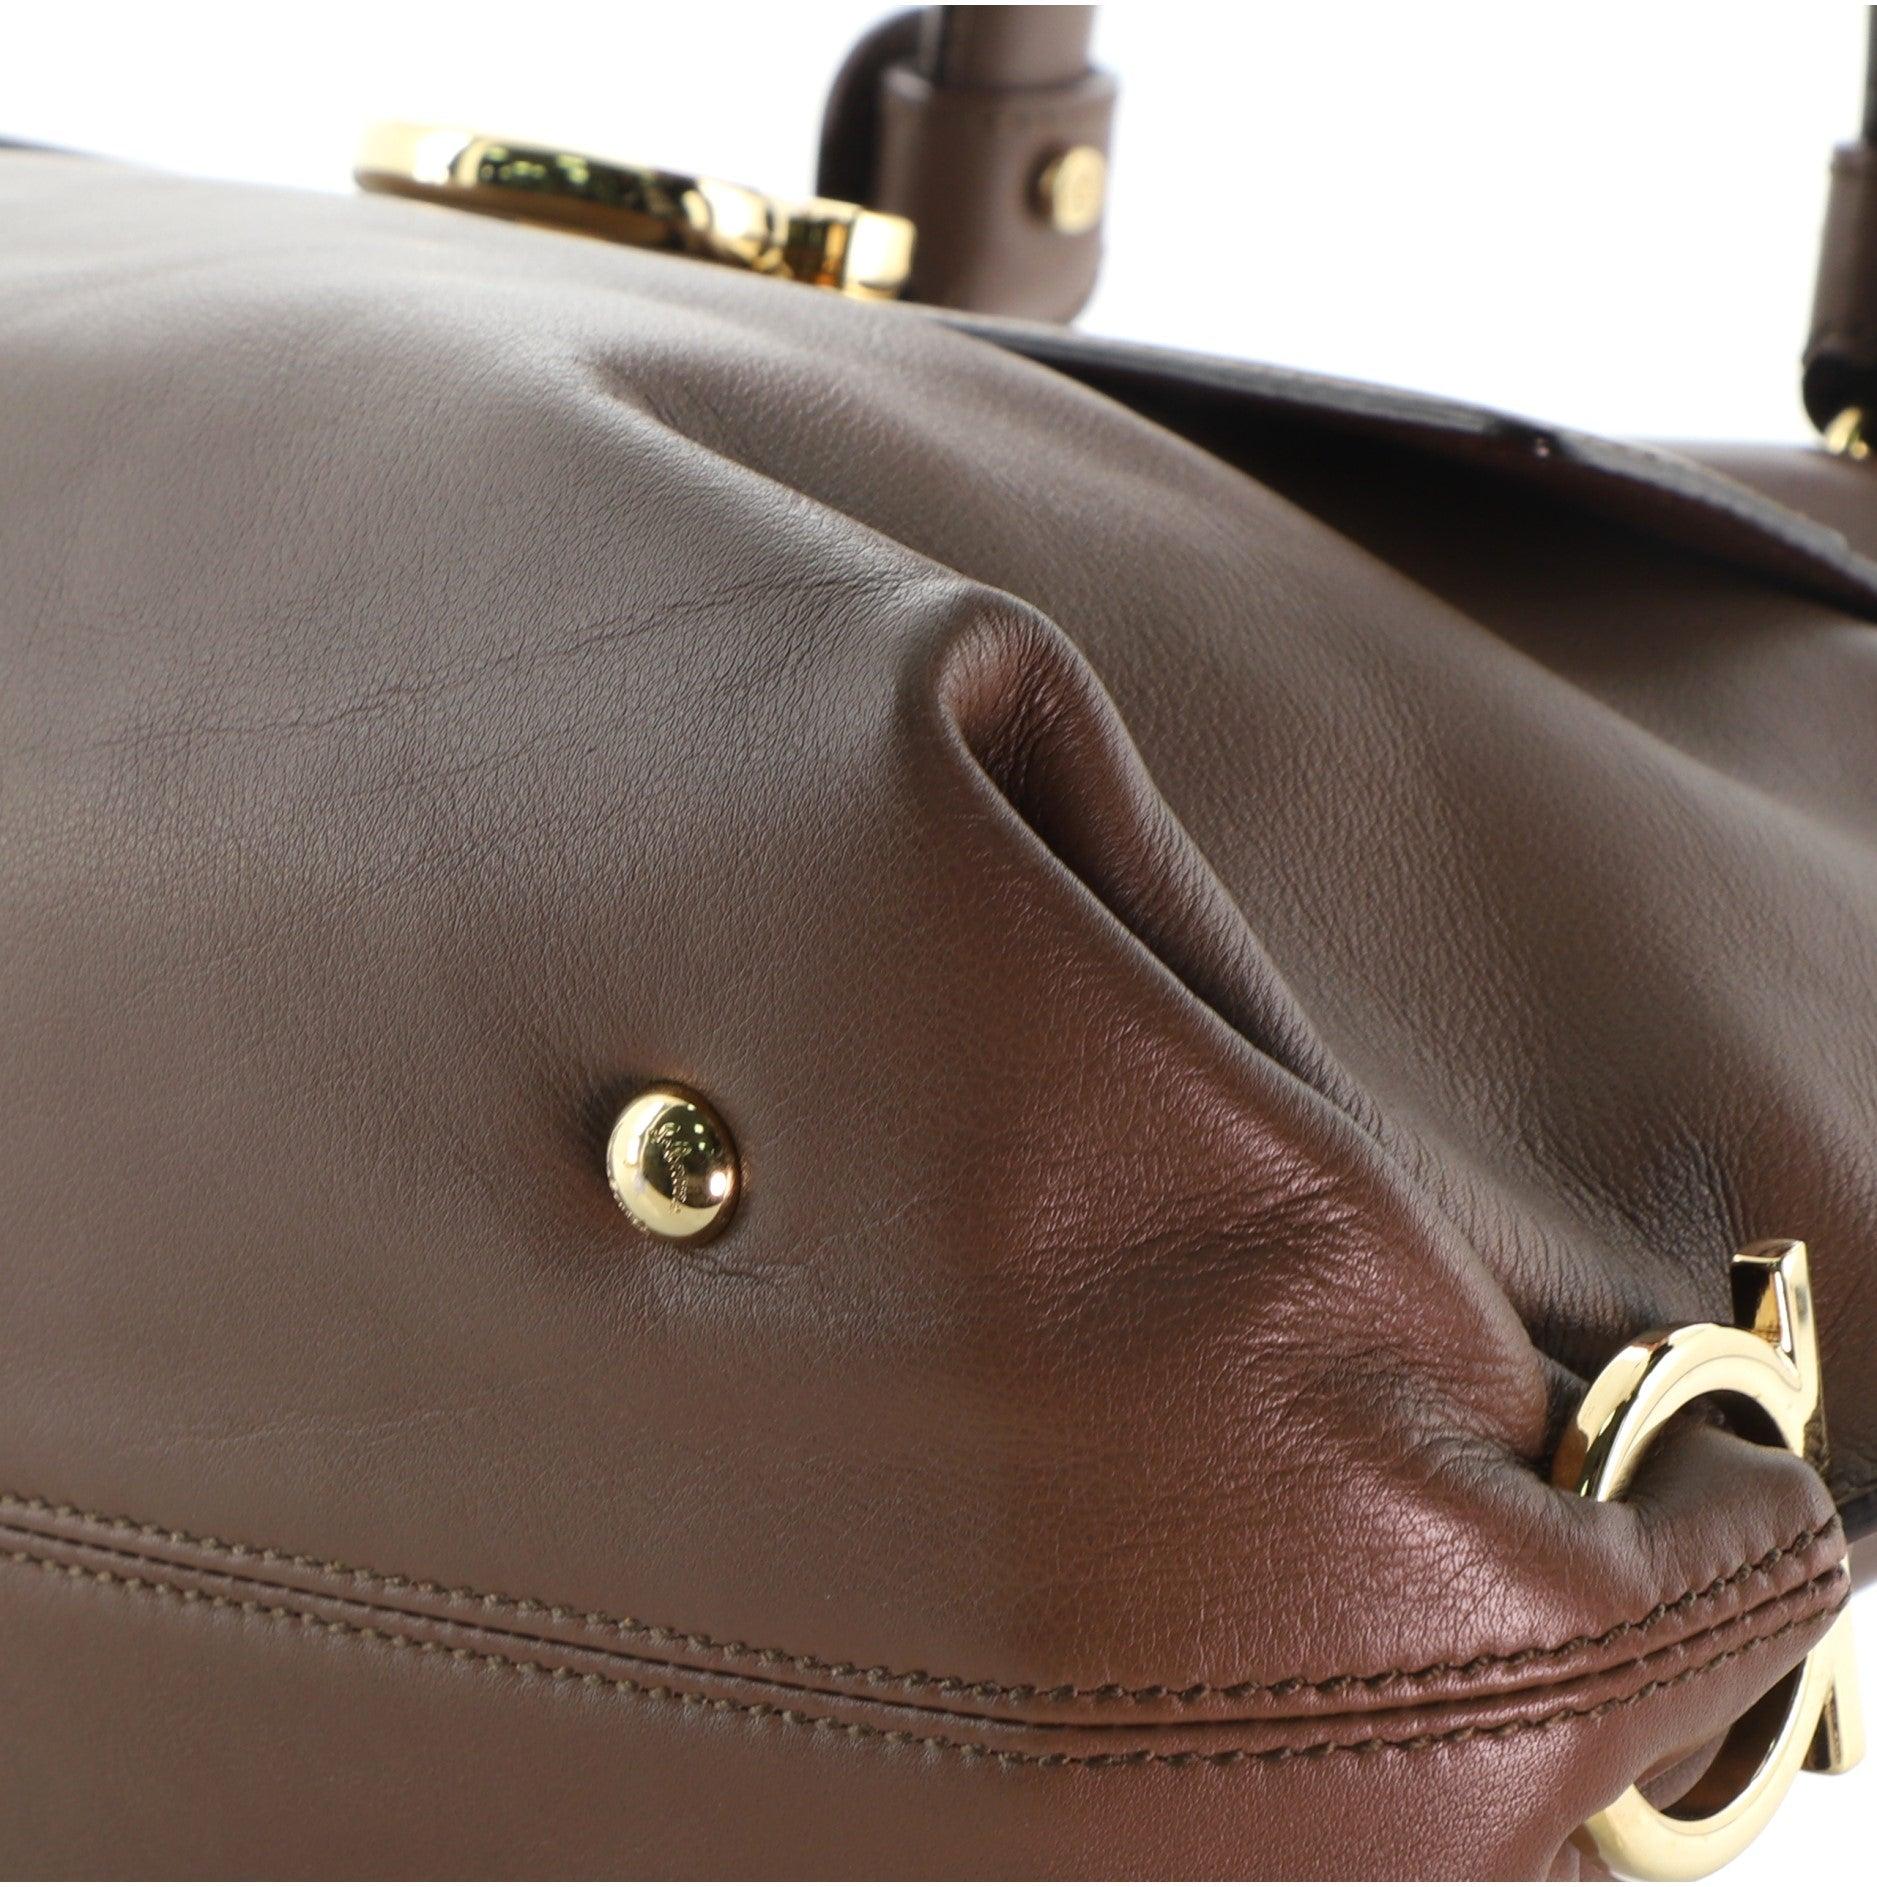 Salvatore Ferragamo Sofia Satchel Smooth Leather Medium Brown Smooth Leather  In Good Condition For Sale In Irvine, CA